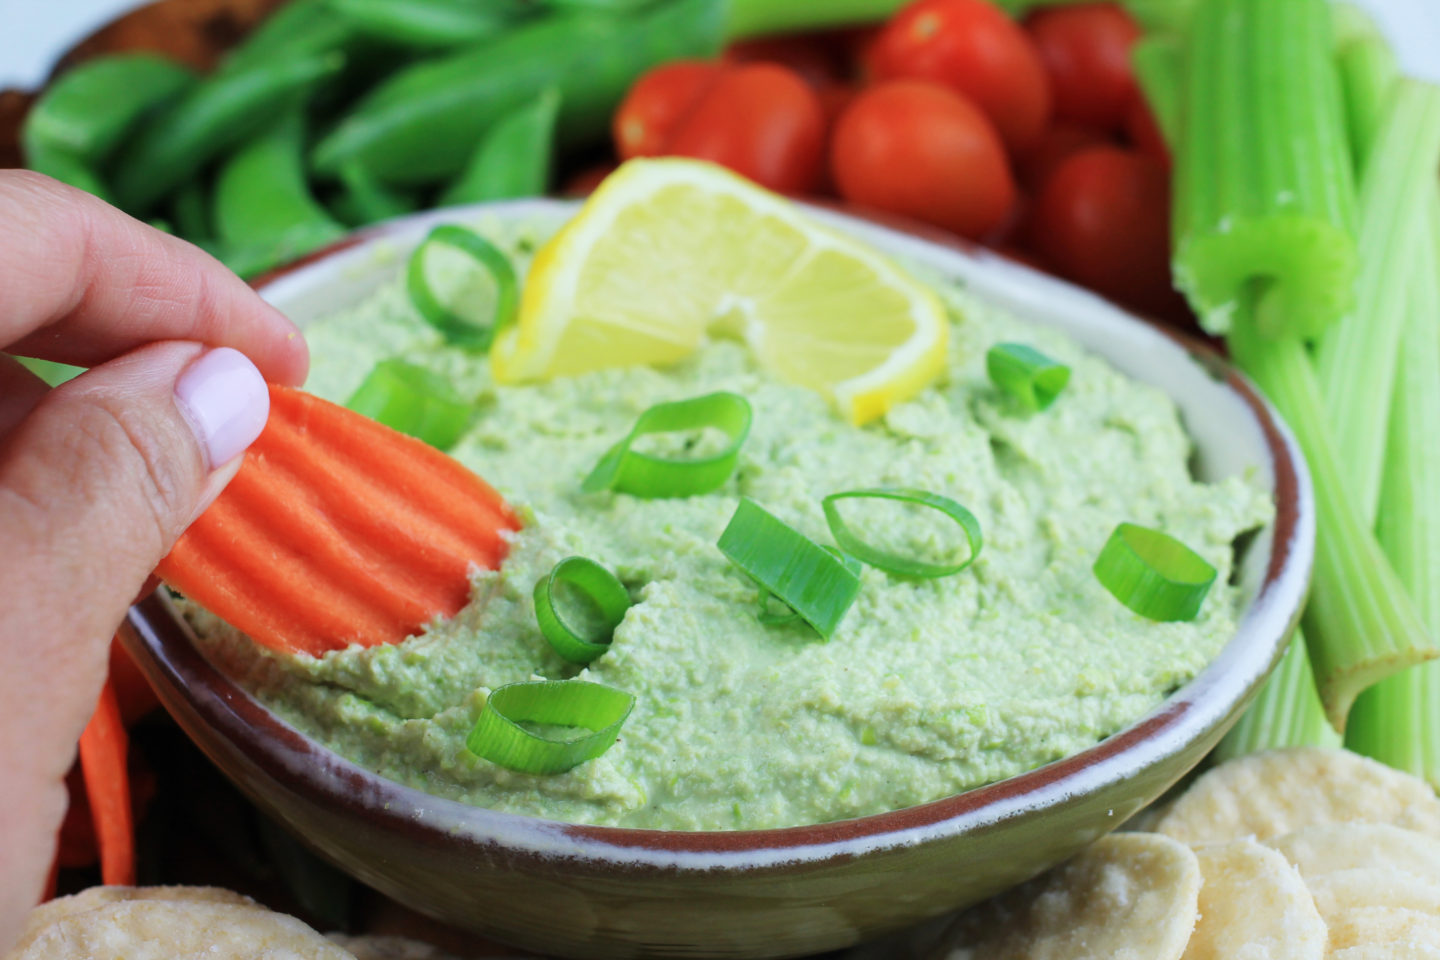 Hand dipping into Edamame Hummus with Carrot